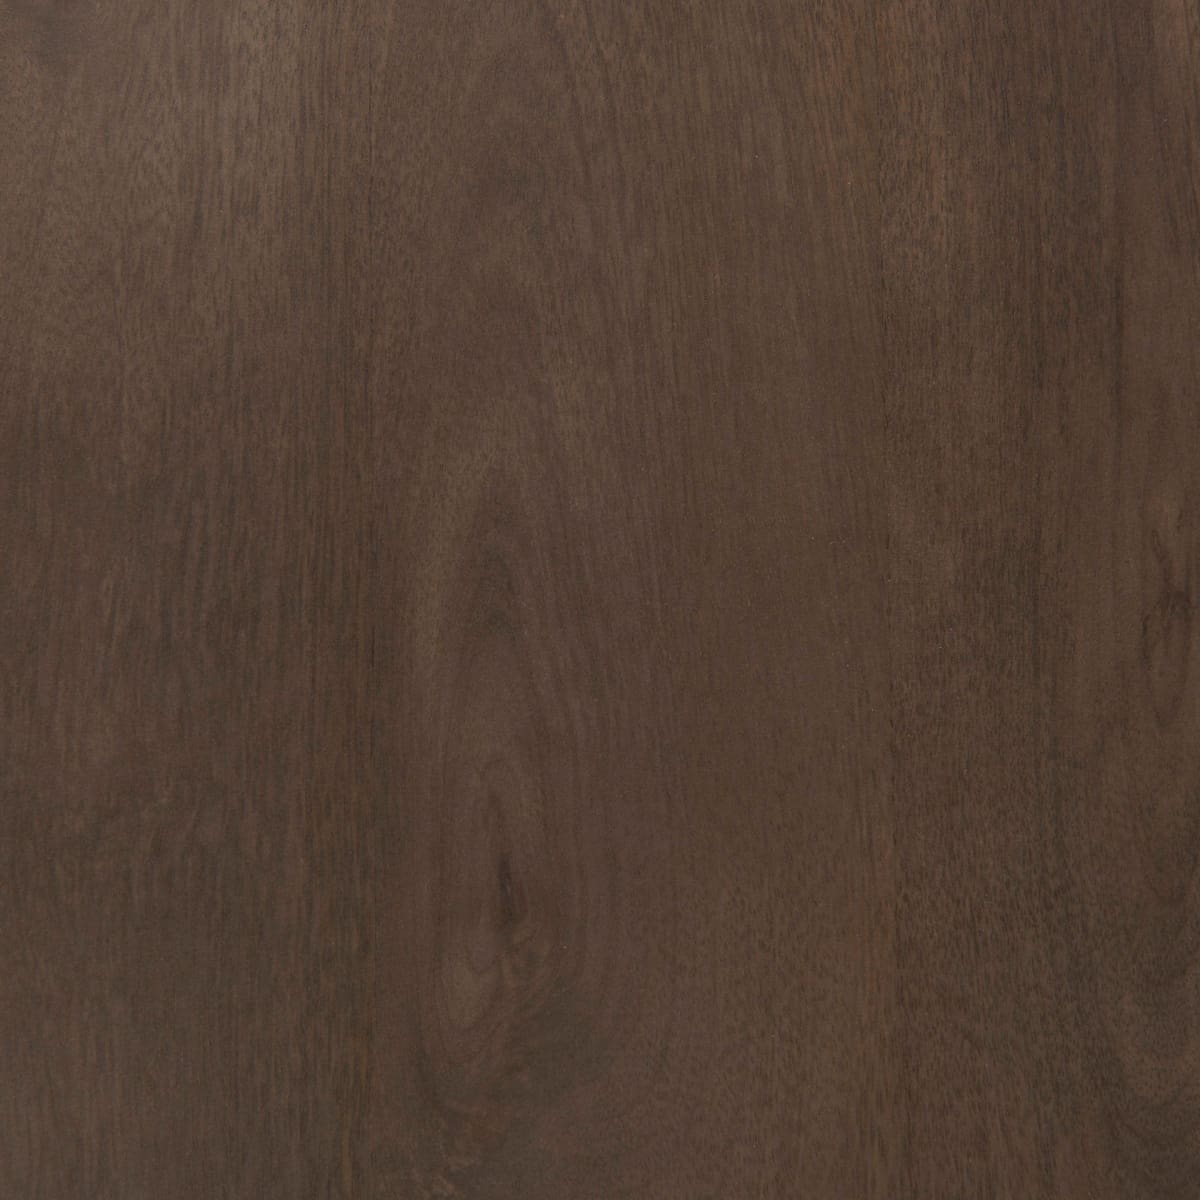 Faye Round Dining Table Dark Brown Wood | Round - dining-table